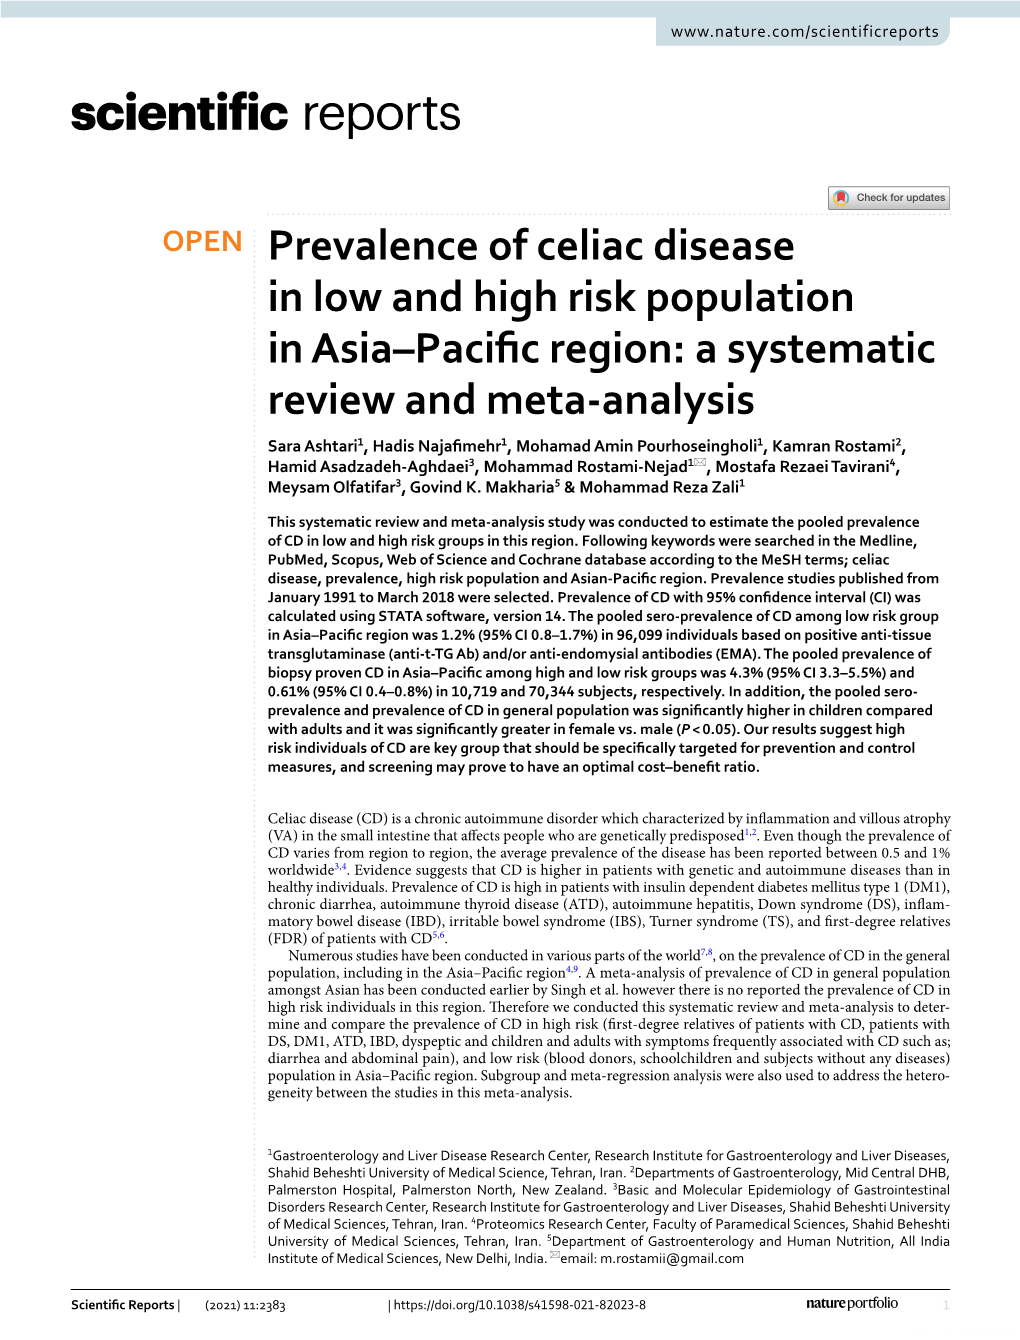 Prevalence of Celiac Disease in Low and High Risk Population In